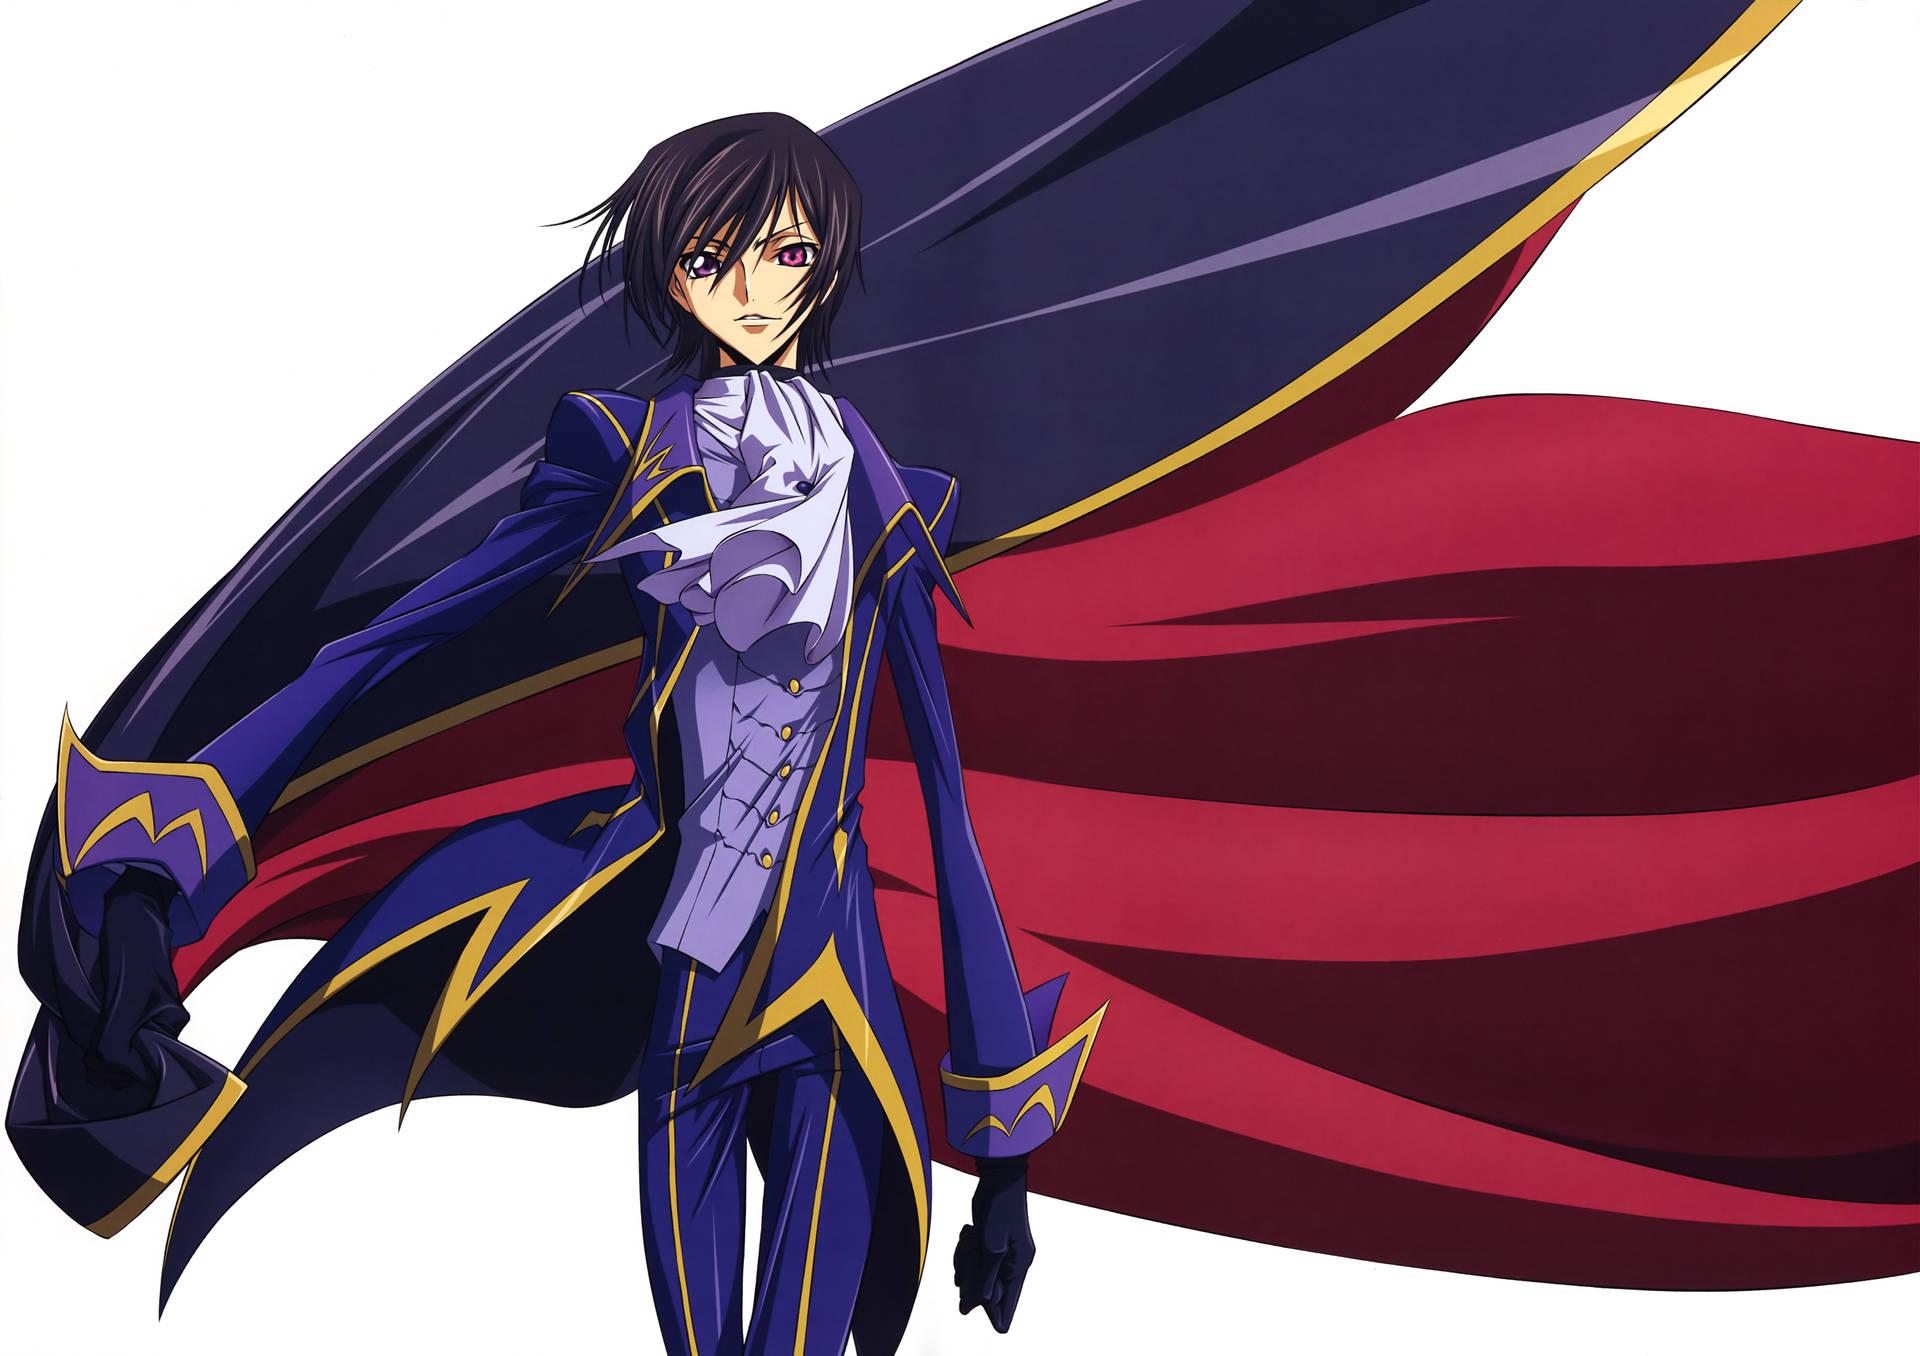 100+] Lelouch Wallpapers